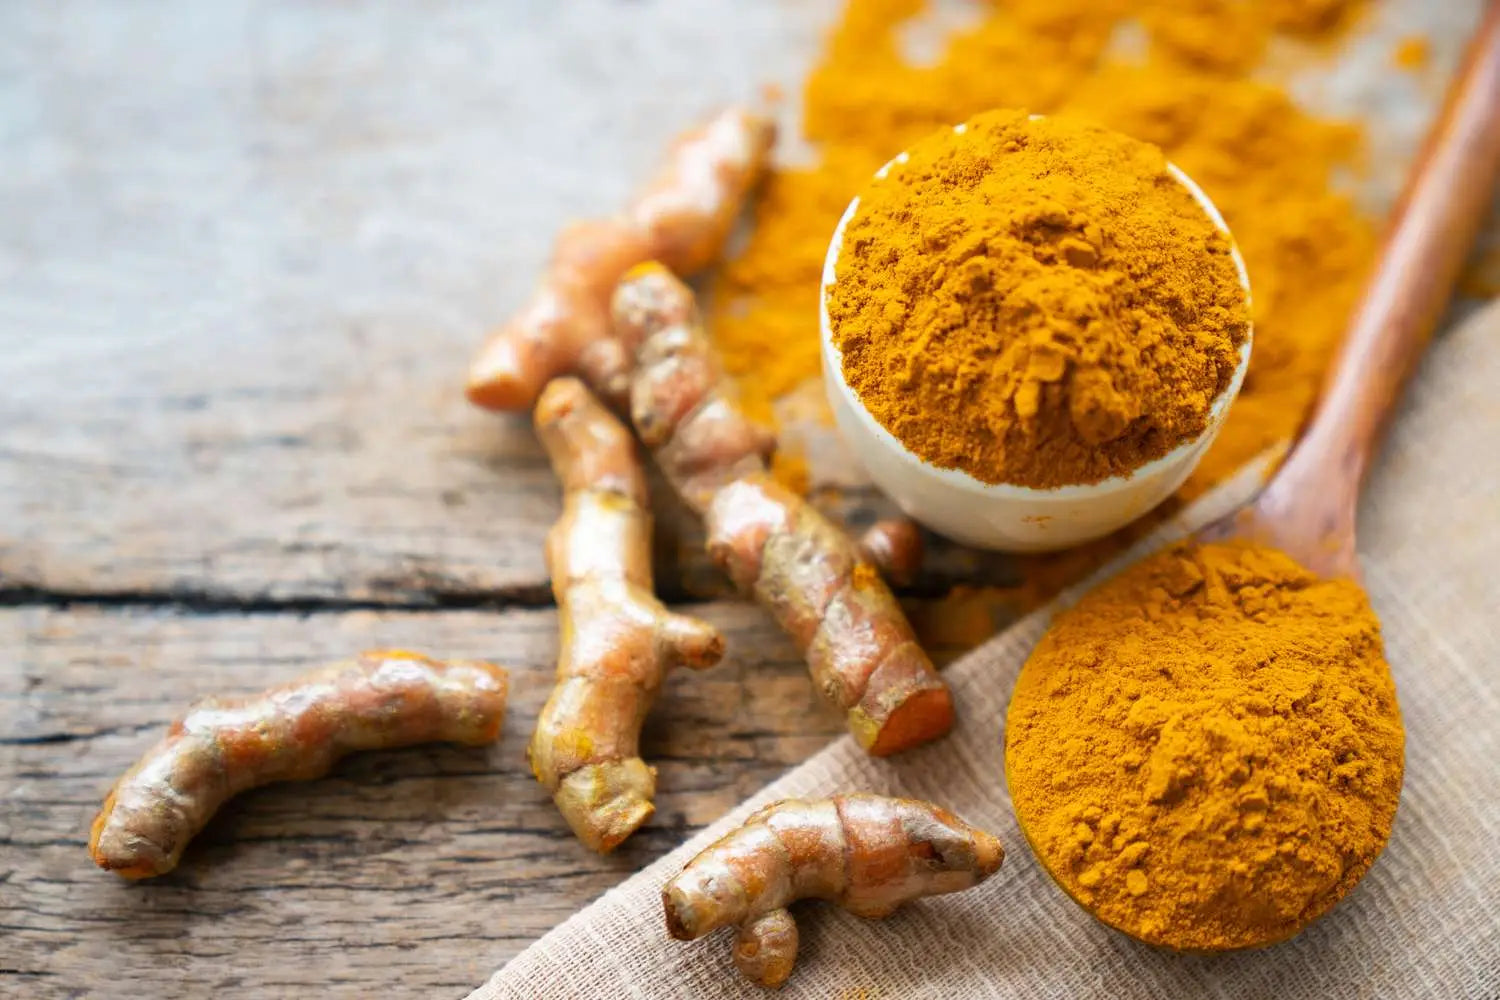 Turmeric: Benefits, Uses, Side Effects, and More